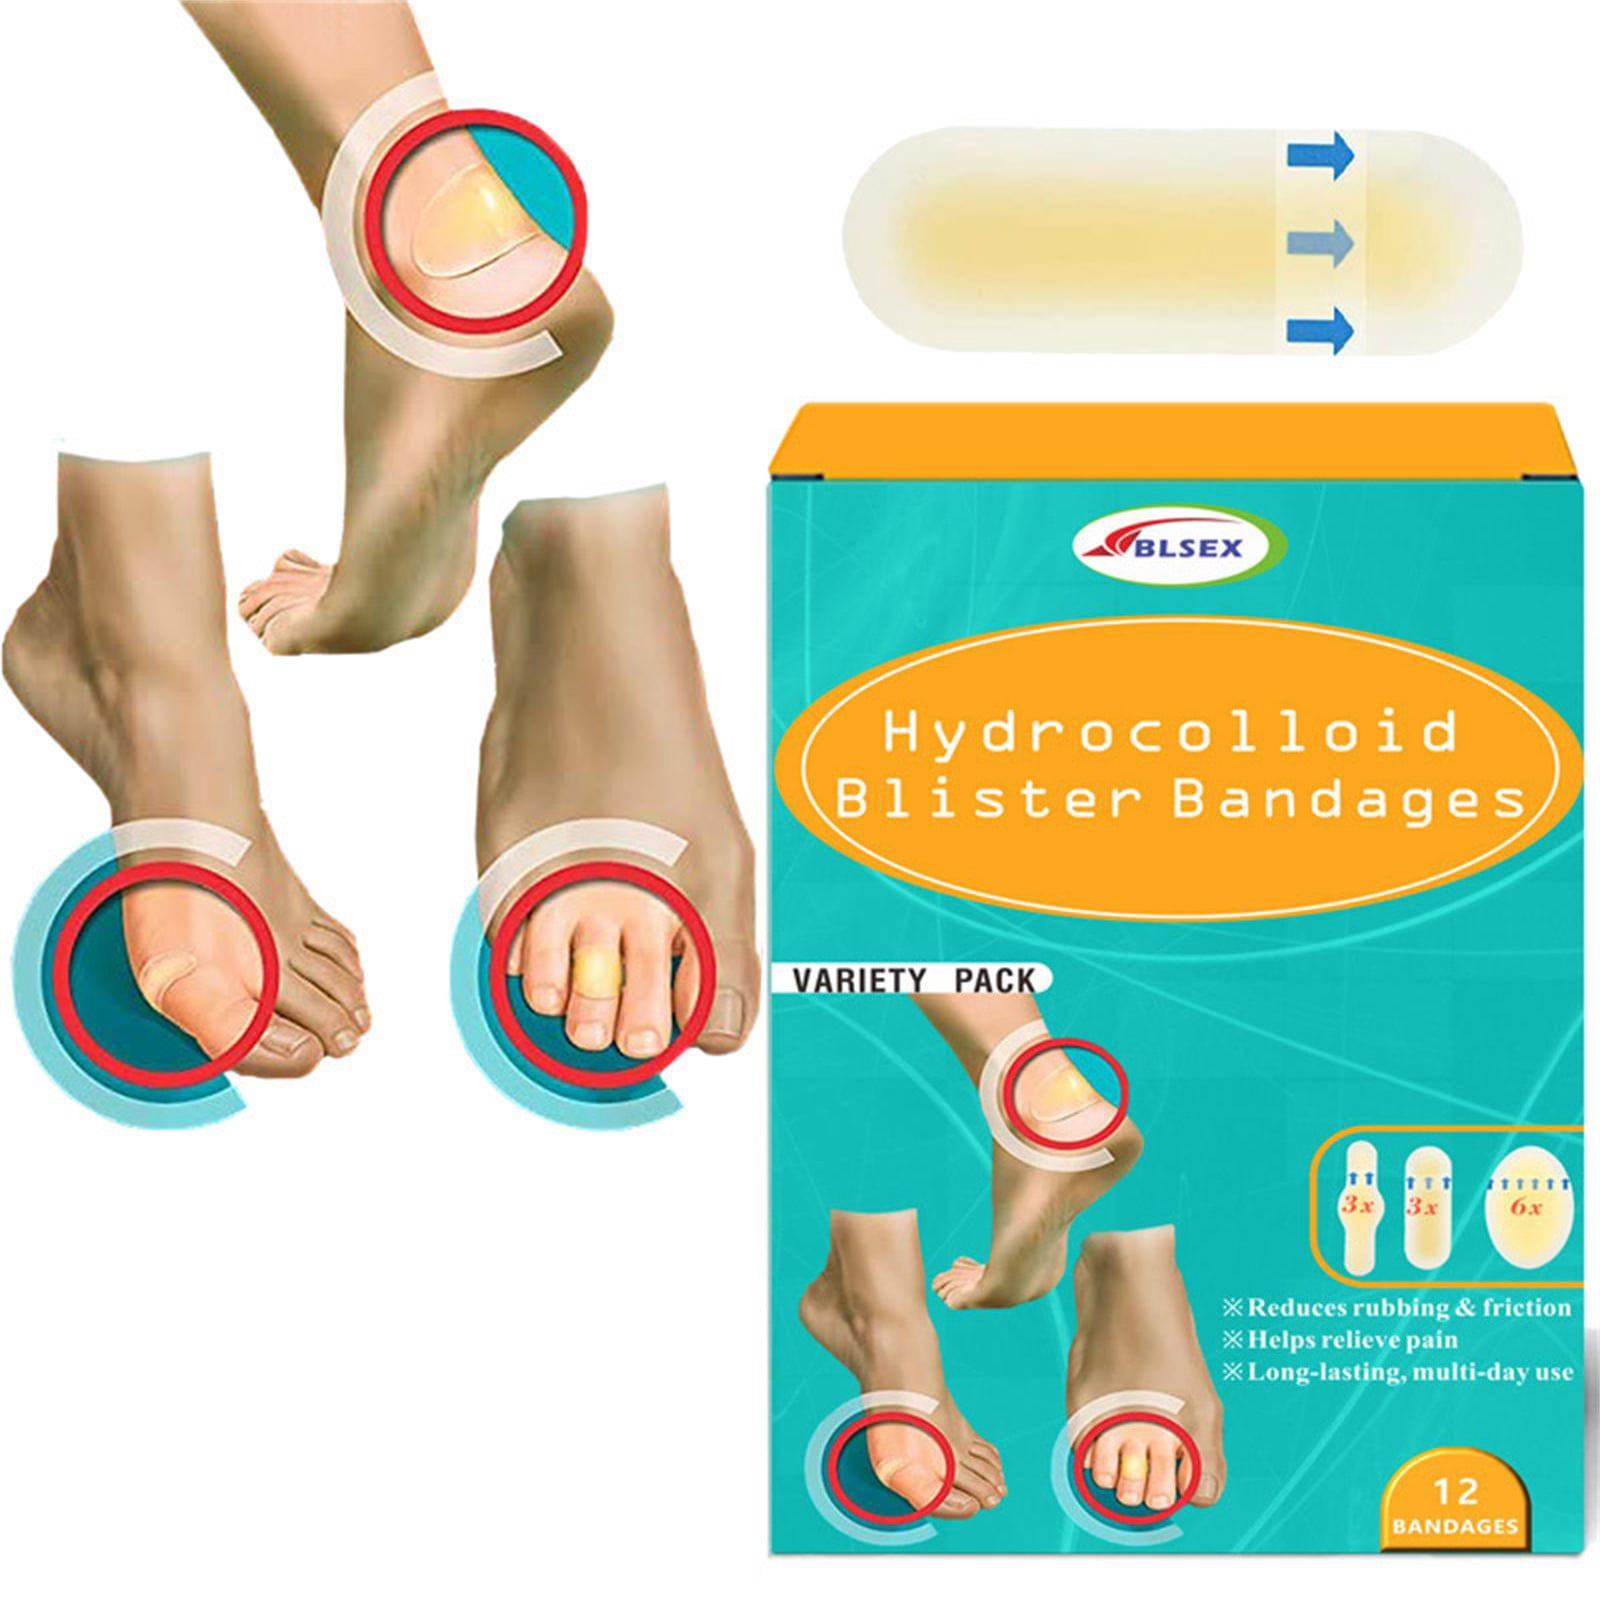 Buy Band-Aid Brand Hydro Seal Adhesive Bandages for Heel Blisters,  Waterproof Blister Pads, 6 ct with Band-Aid Brand Hydro Seal Adhesive  Bandages for Toe Blisters, Waterproof Blister Pads, 8 ct Online at